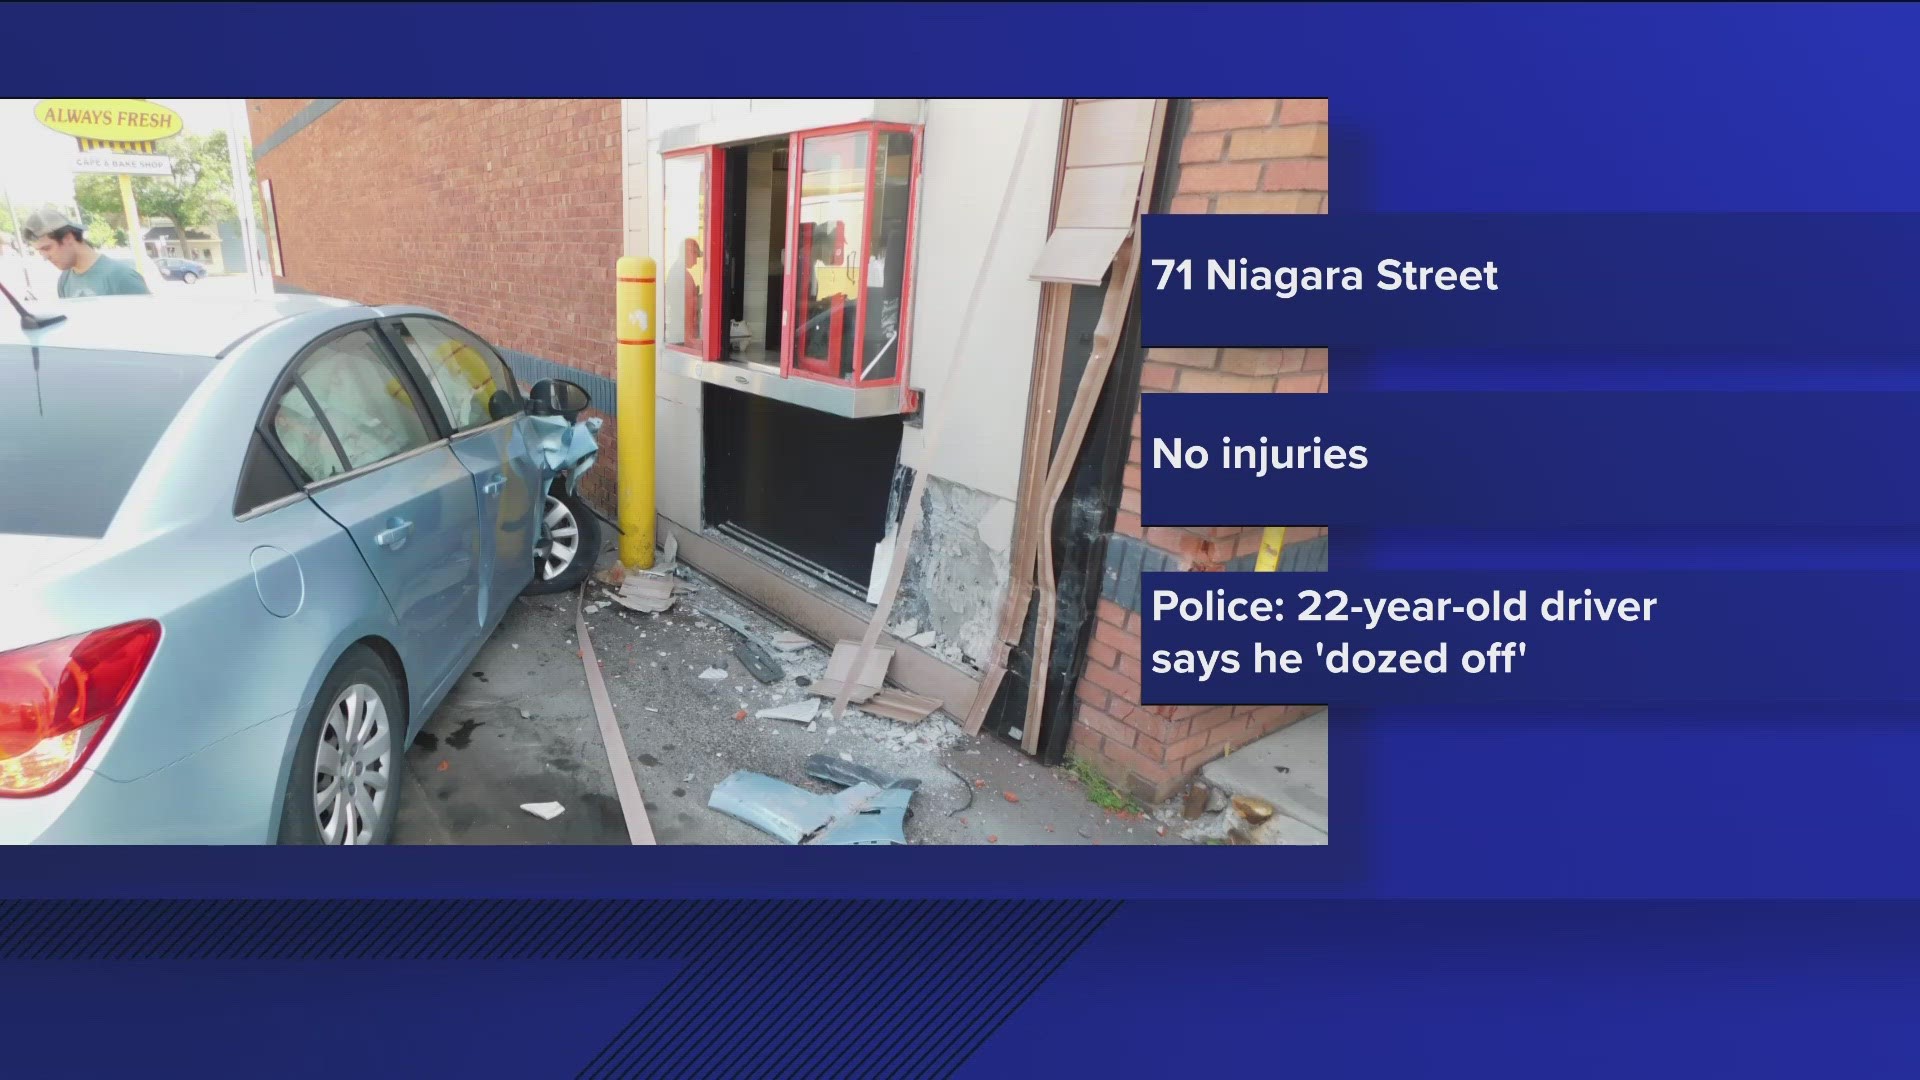 The accident happened at the Tim Hortons at 71 Niagara Street in the City of Tonawanda just before 5 p.m.